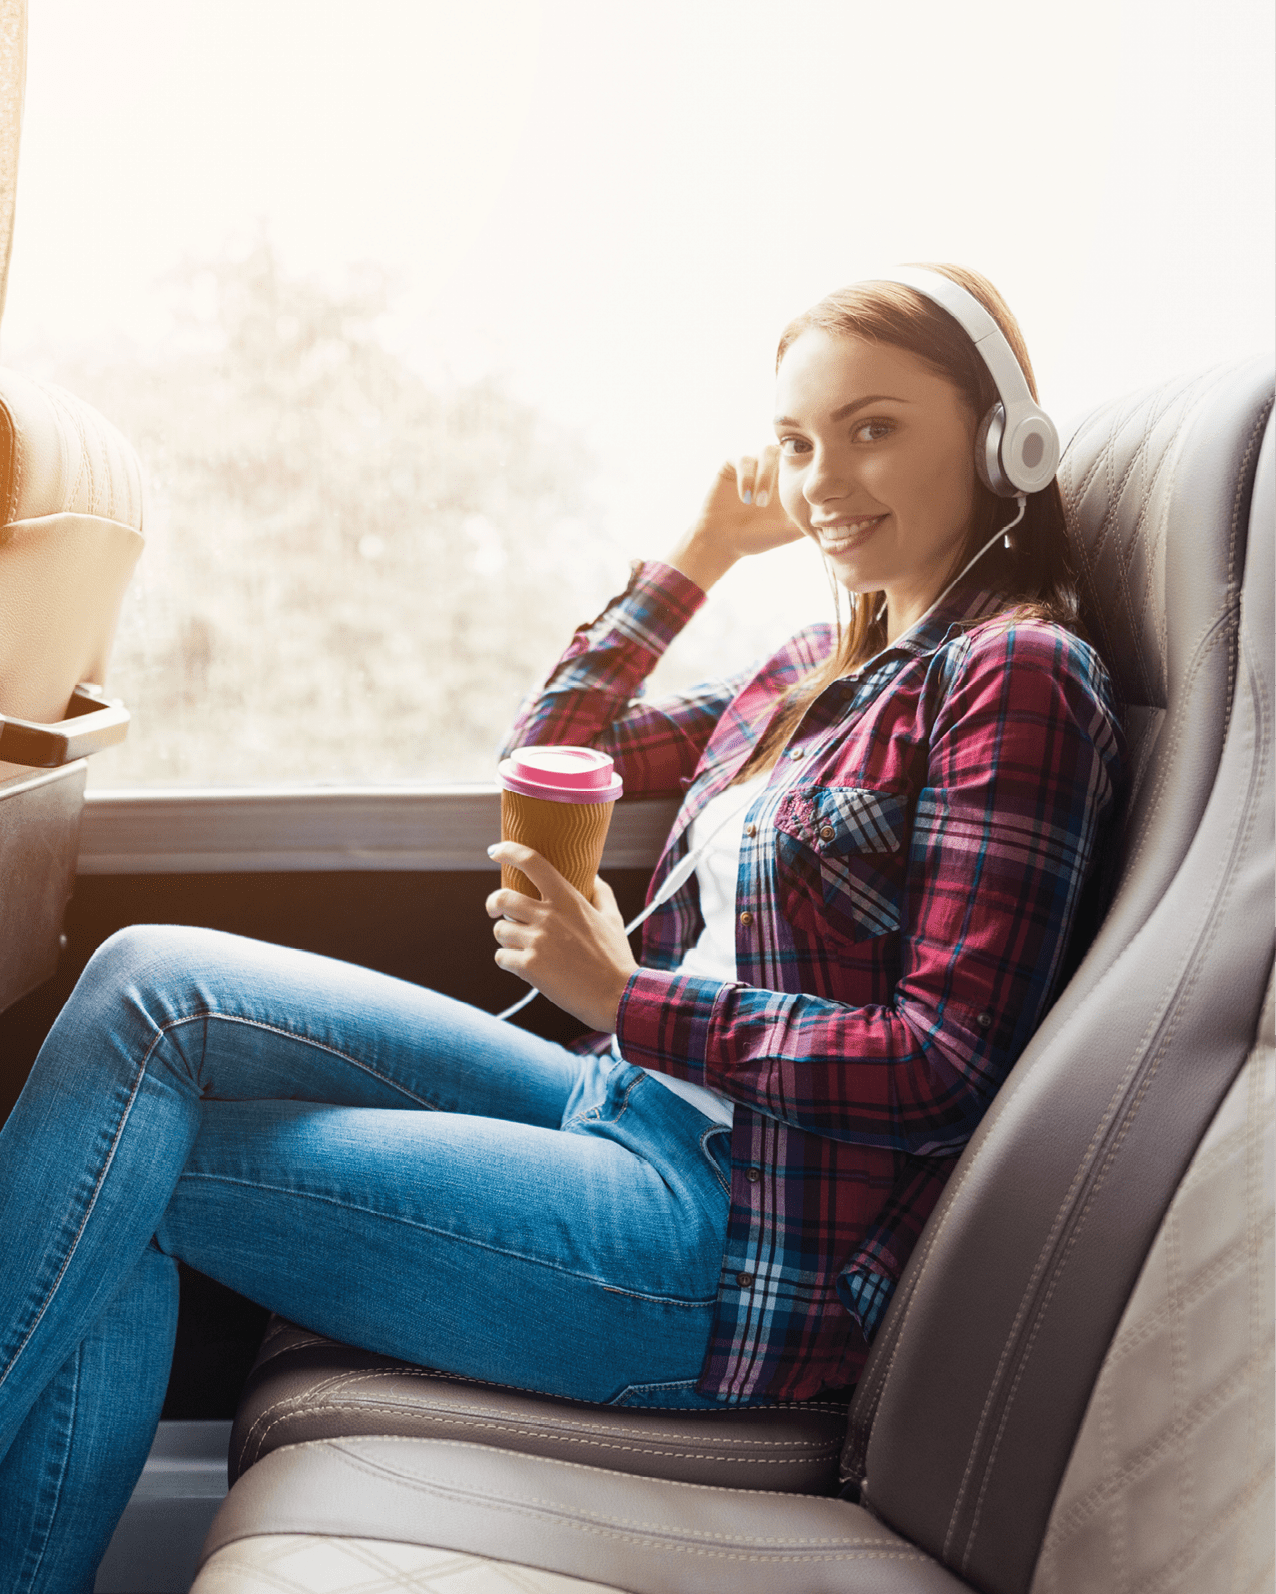 The woman on the passenger seat of the bus listens to music and drinks coffee. She looks out the window and smiles. Outside the window is a beautiful green landscape. 878483660 traveler, country, background, holiday, trip, urban, vacation, white, downtown, view, young, woman, happy, man, concept, lifestyle, person, casual, baggage, sightseeing, outdoor, object, landmark, transport